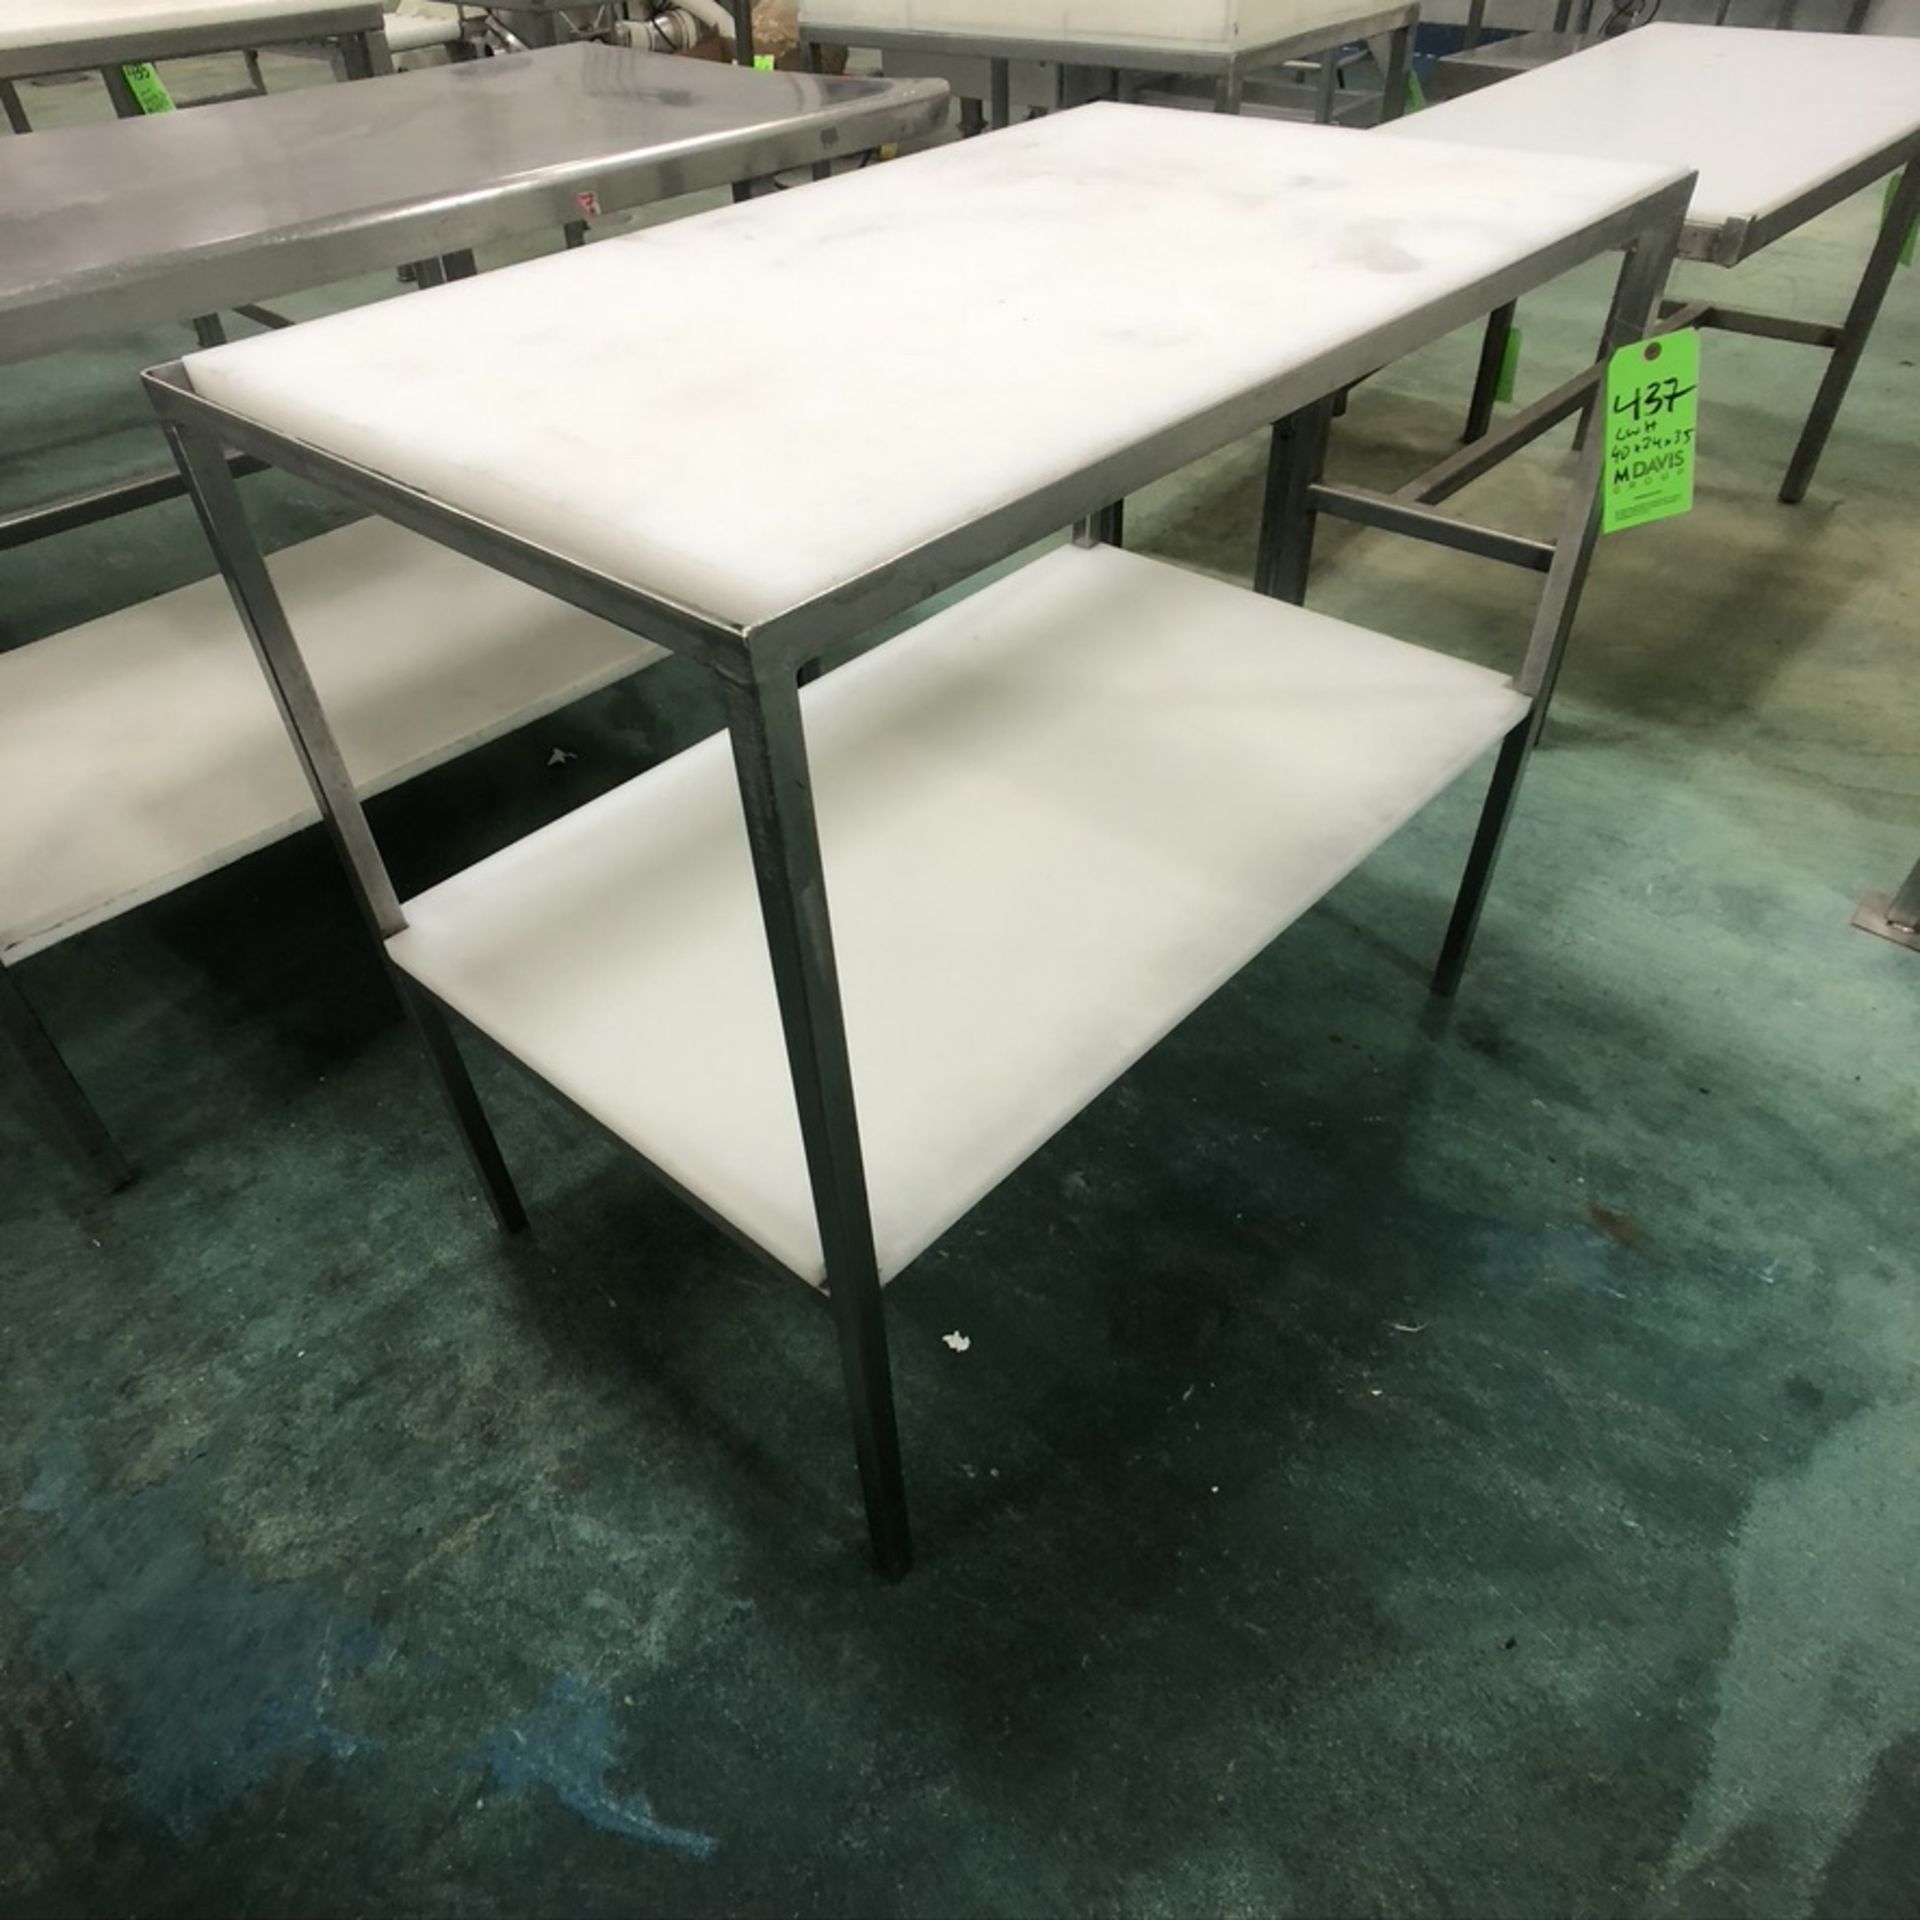 S/S TABLE WITH CUTTING BOARD TOP AND BOTTOM SHELF APPX DIM. LWH'' 40 X 24 X 35